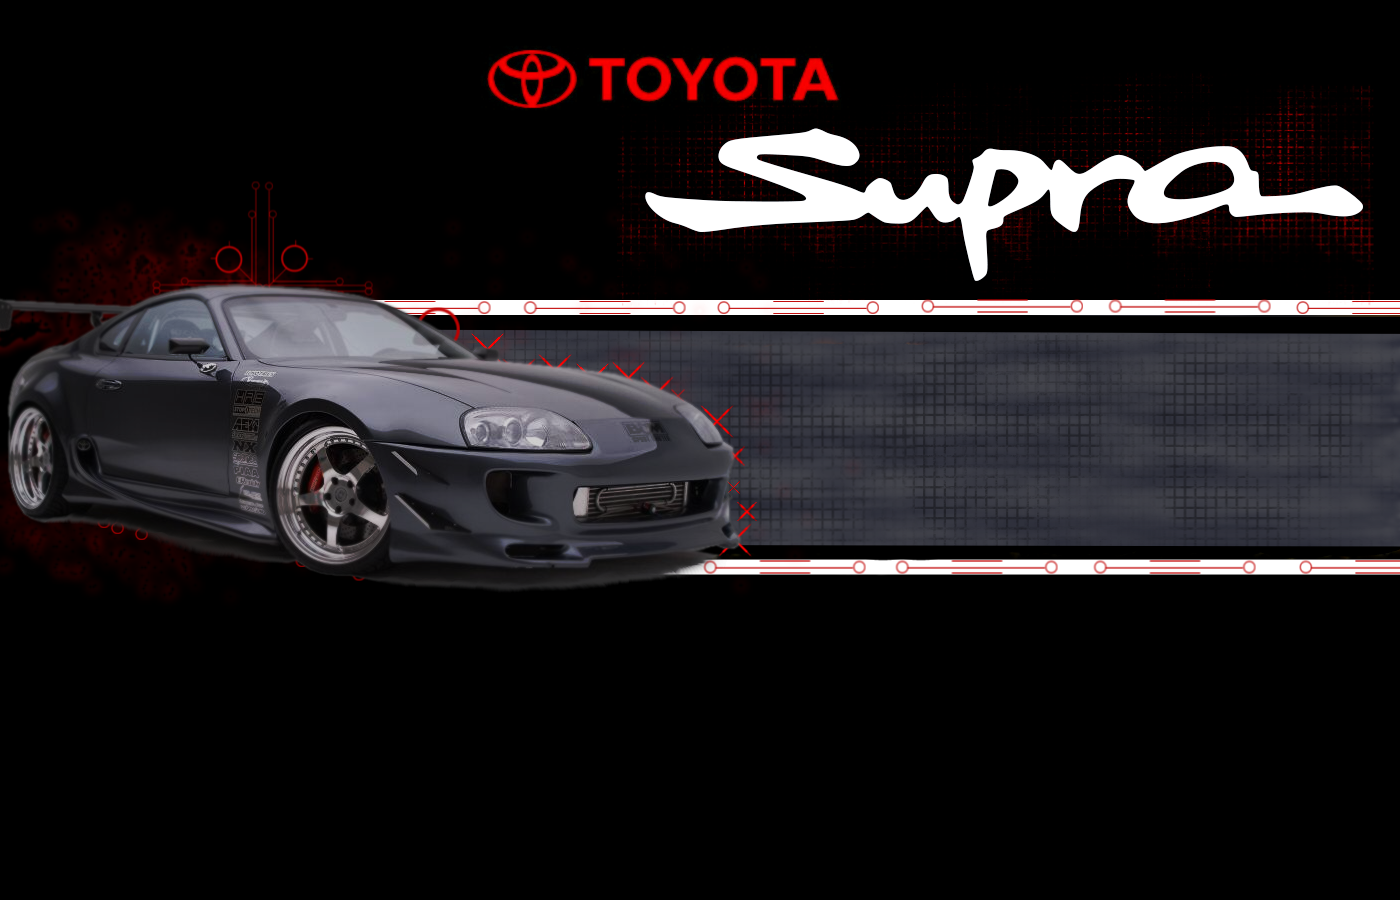 Toyota Supra Background For Desktop 588454 With Resolutions 1400900 1400x900